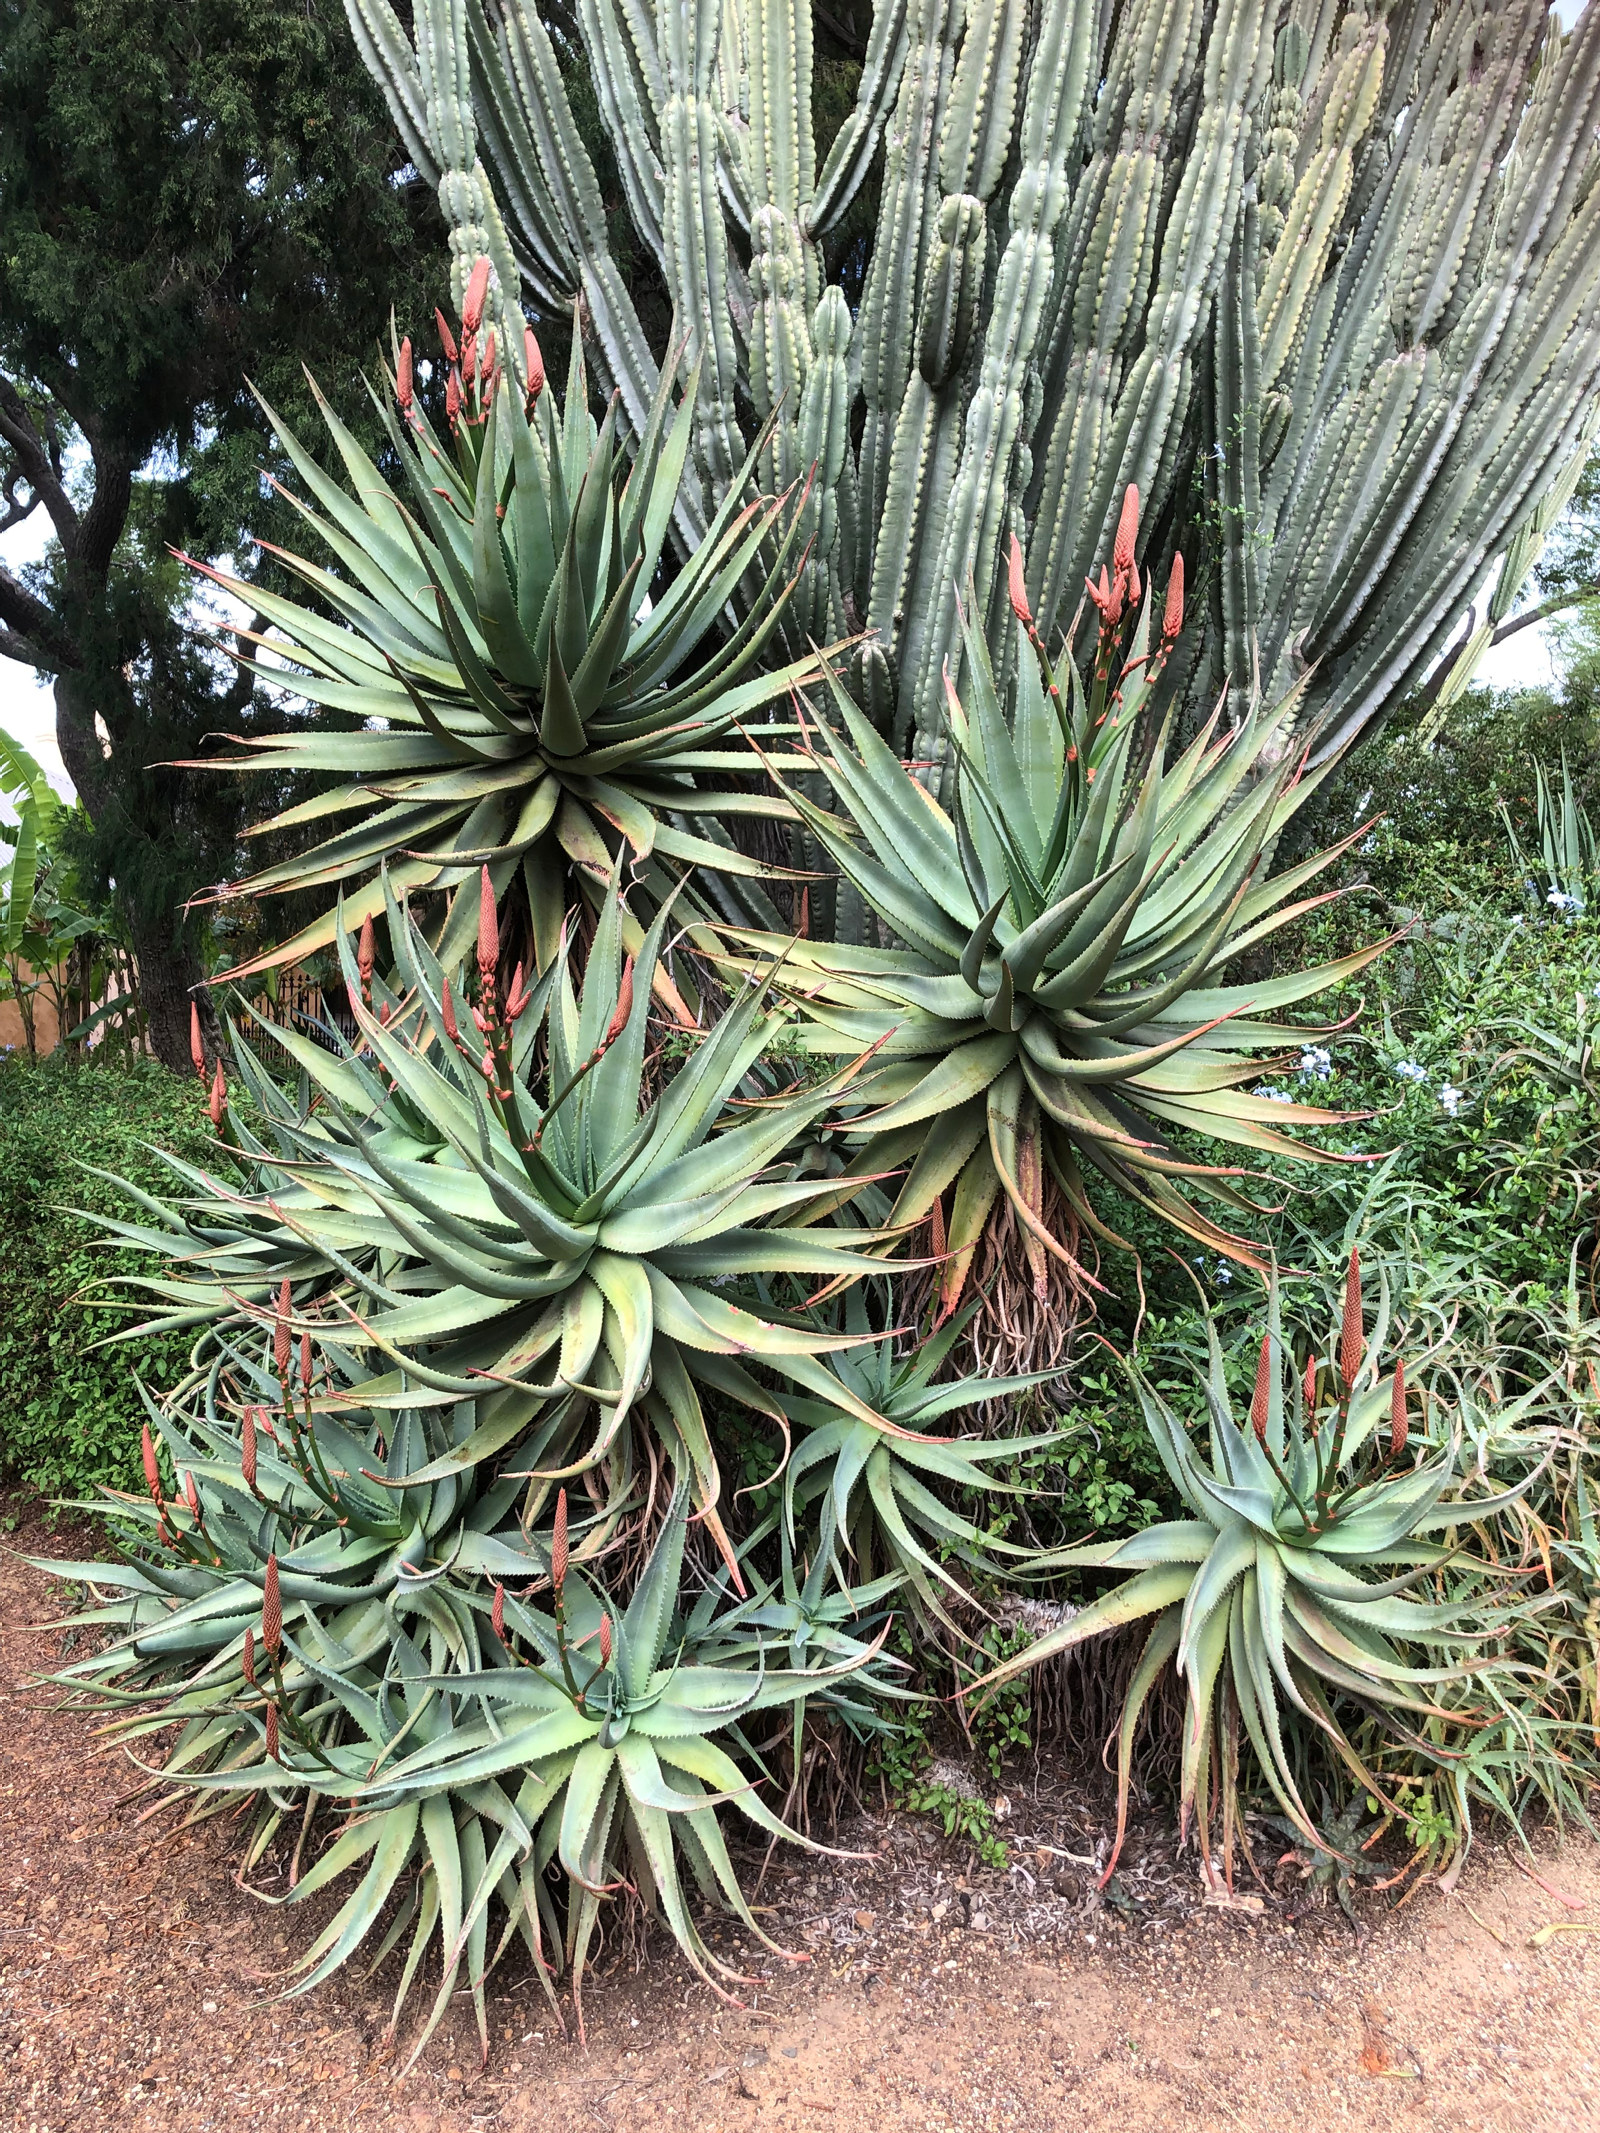 the large pastel green clump of Aloe arborescens is beginning to send out its red-orange flower spikes at Elizabeth Farm